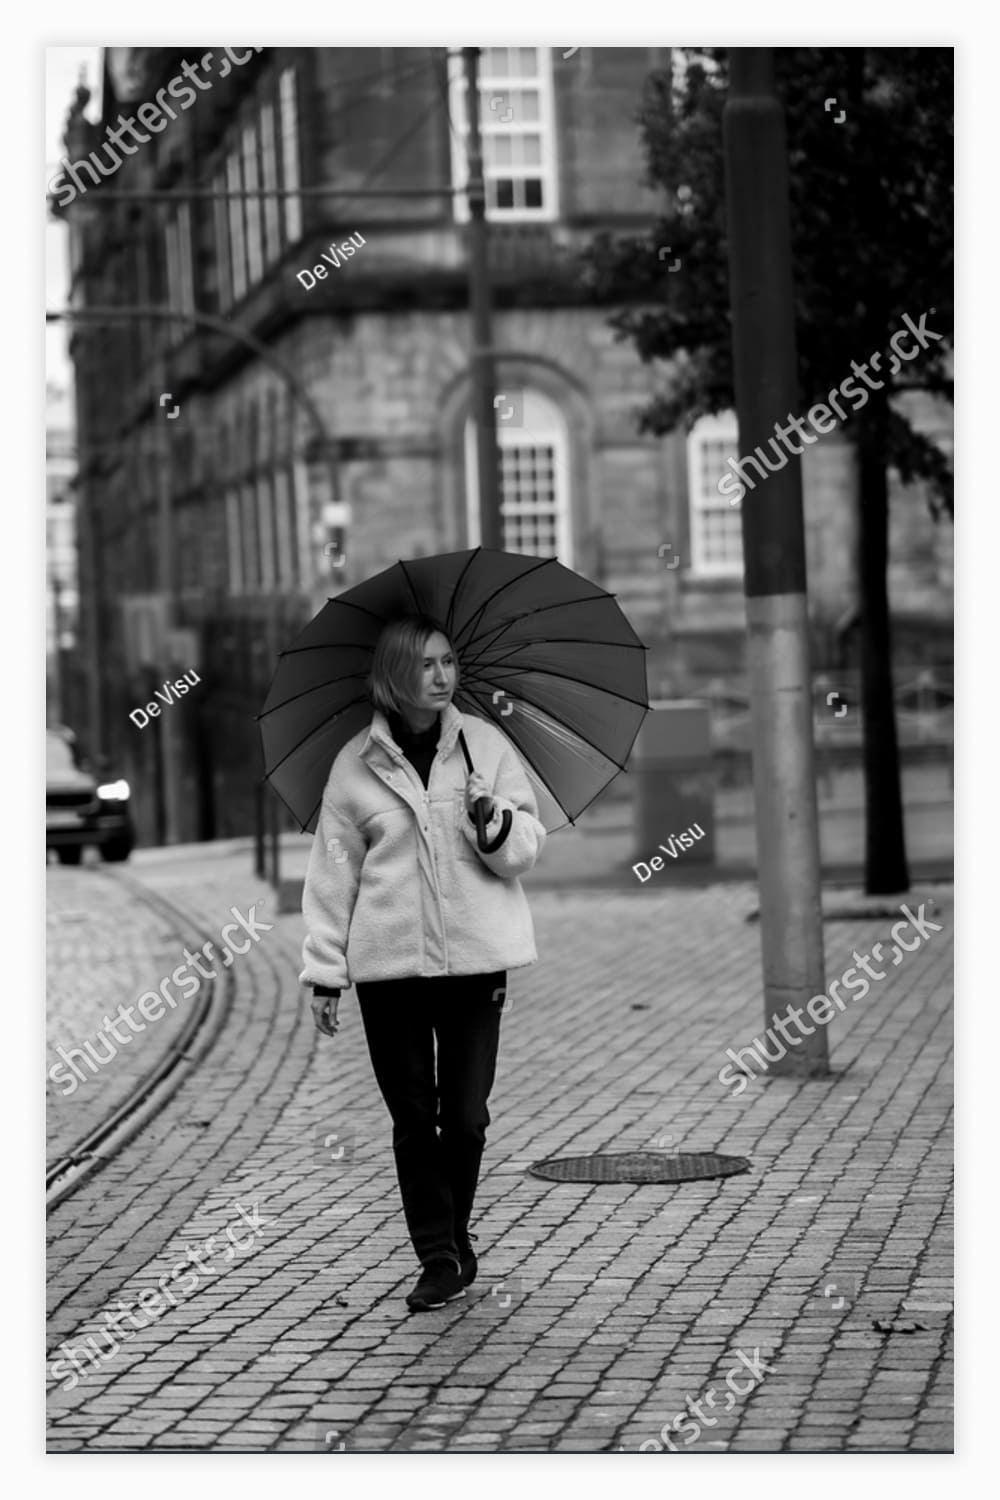 A woman with an umbrella stands on the street.